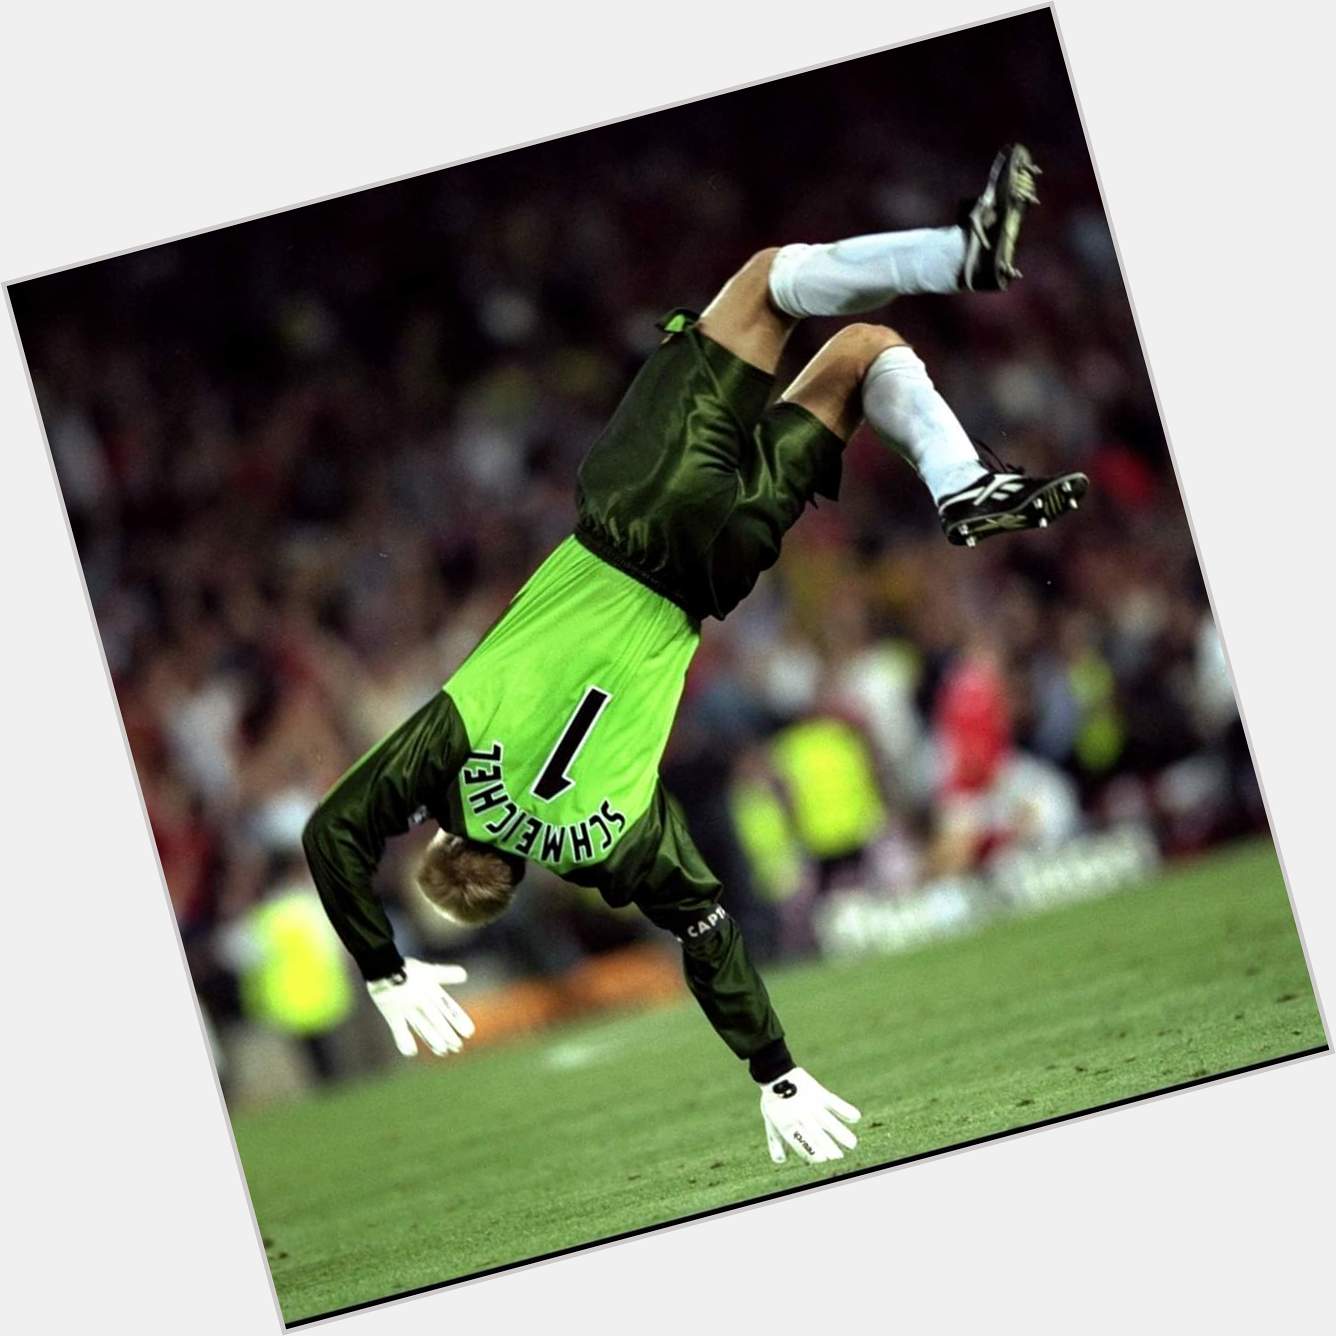 Happy birthday to Peter Schmeichel...
The Premier League\s greatest ever goalkeeper? 